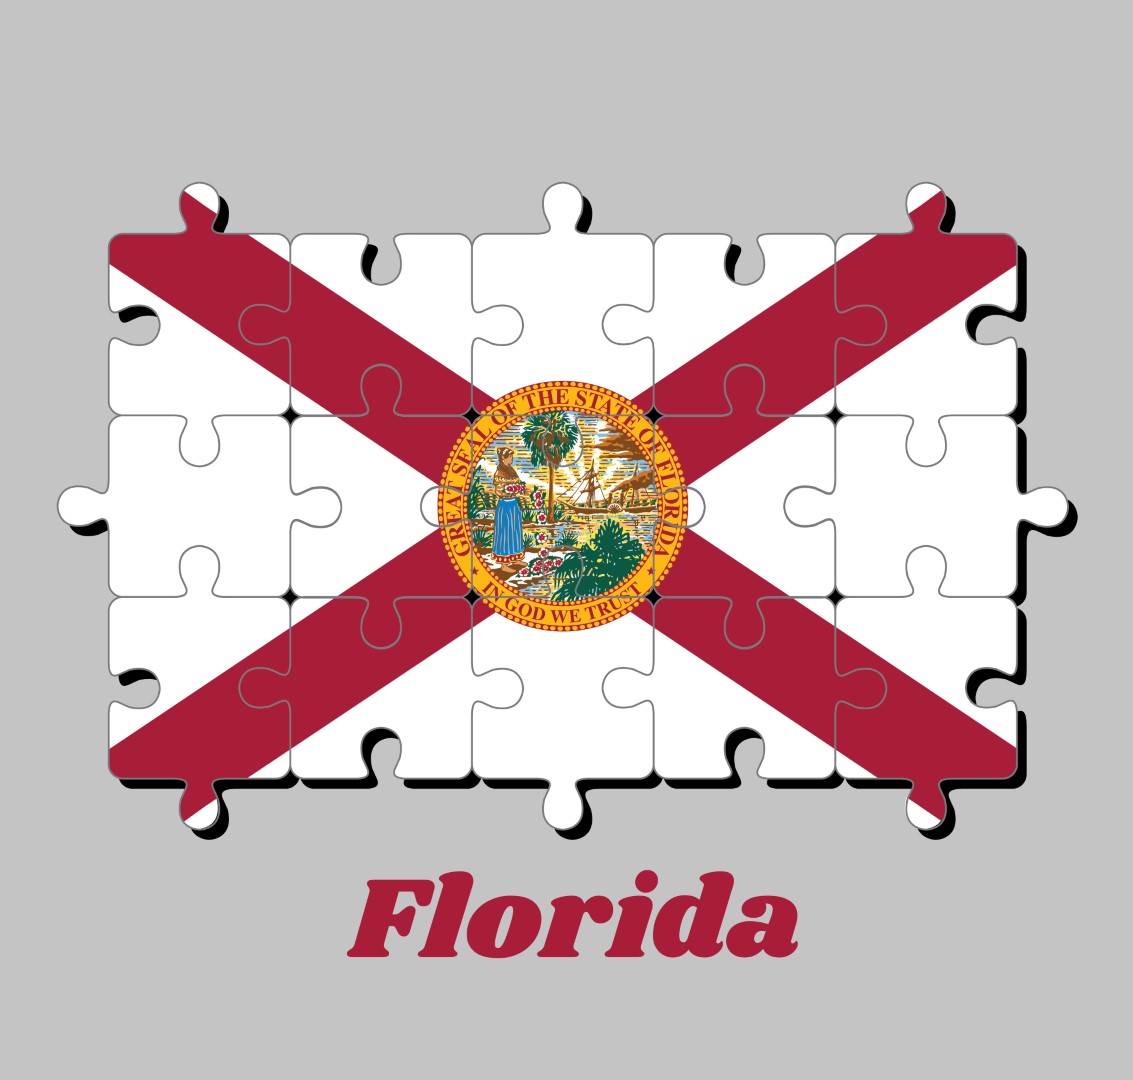 Jigsaw puzzle of Florida flag, with the state seal superimposed on the center. The states of America, Concept of Fulfillment.